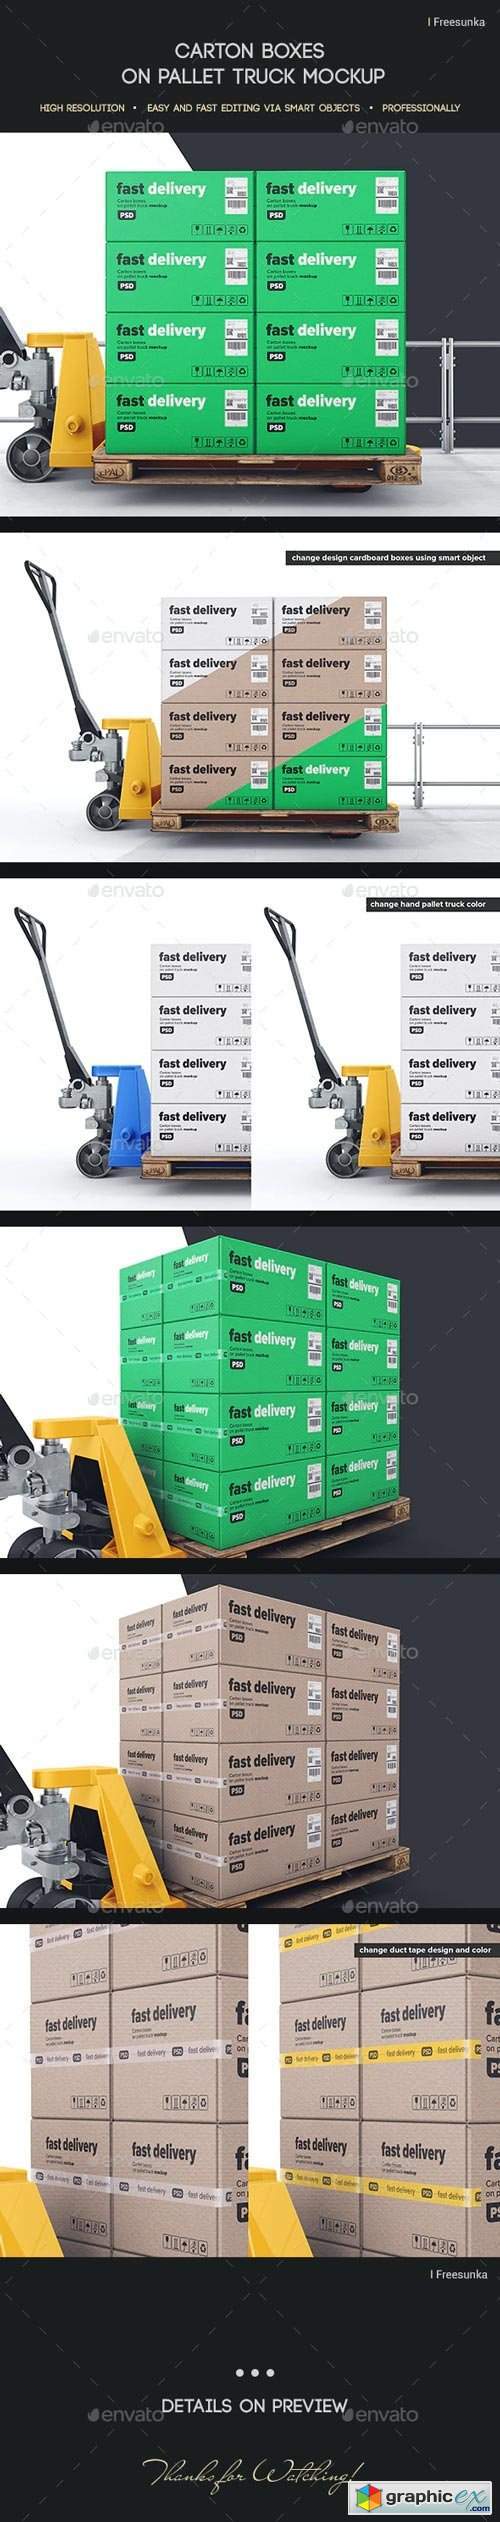 Download Carton Boxes On Pallet Truck Mockup Free Download Vector Stock Image Photoshop Icon